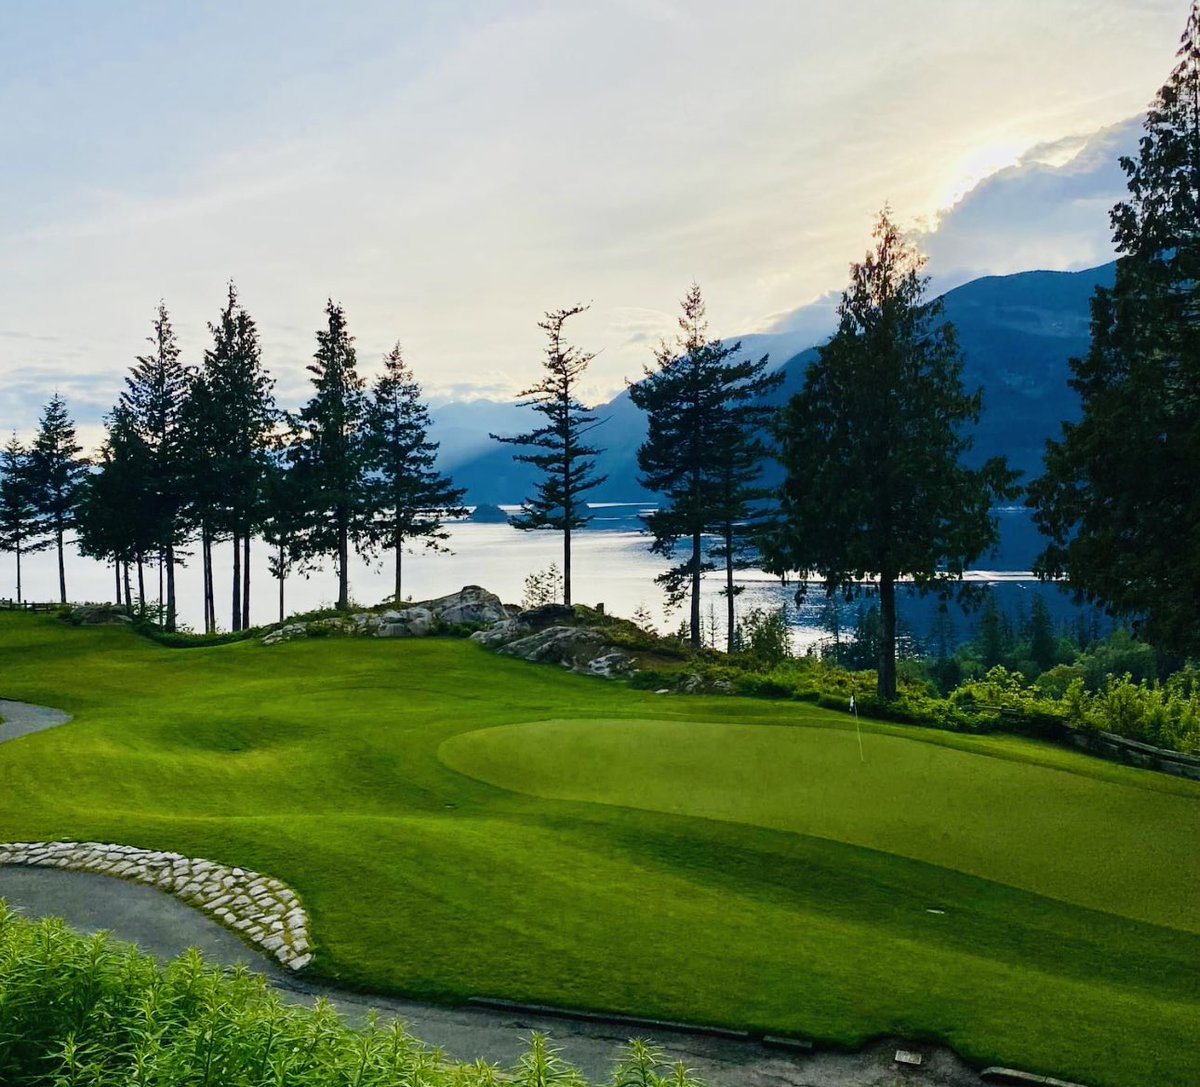 Yessir! 
At @furrycreekgolf in Vancouver, BC. 
Making this one of my favourite all time golf courses in the world, not just for the ace but also the scenic holes! #BCGolf #HoleInOne